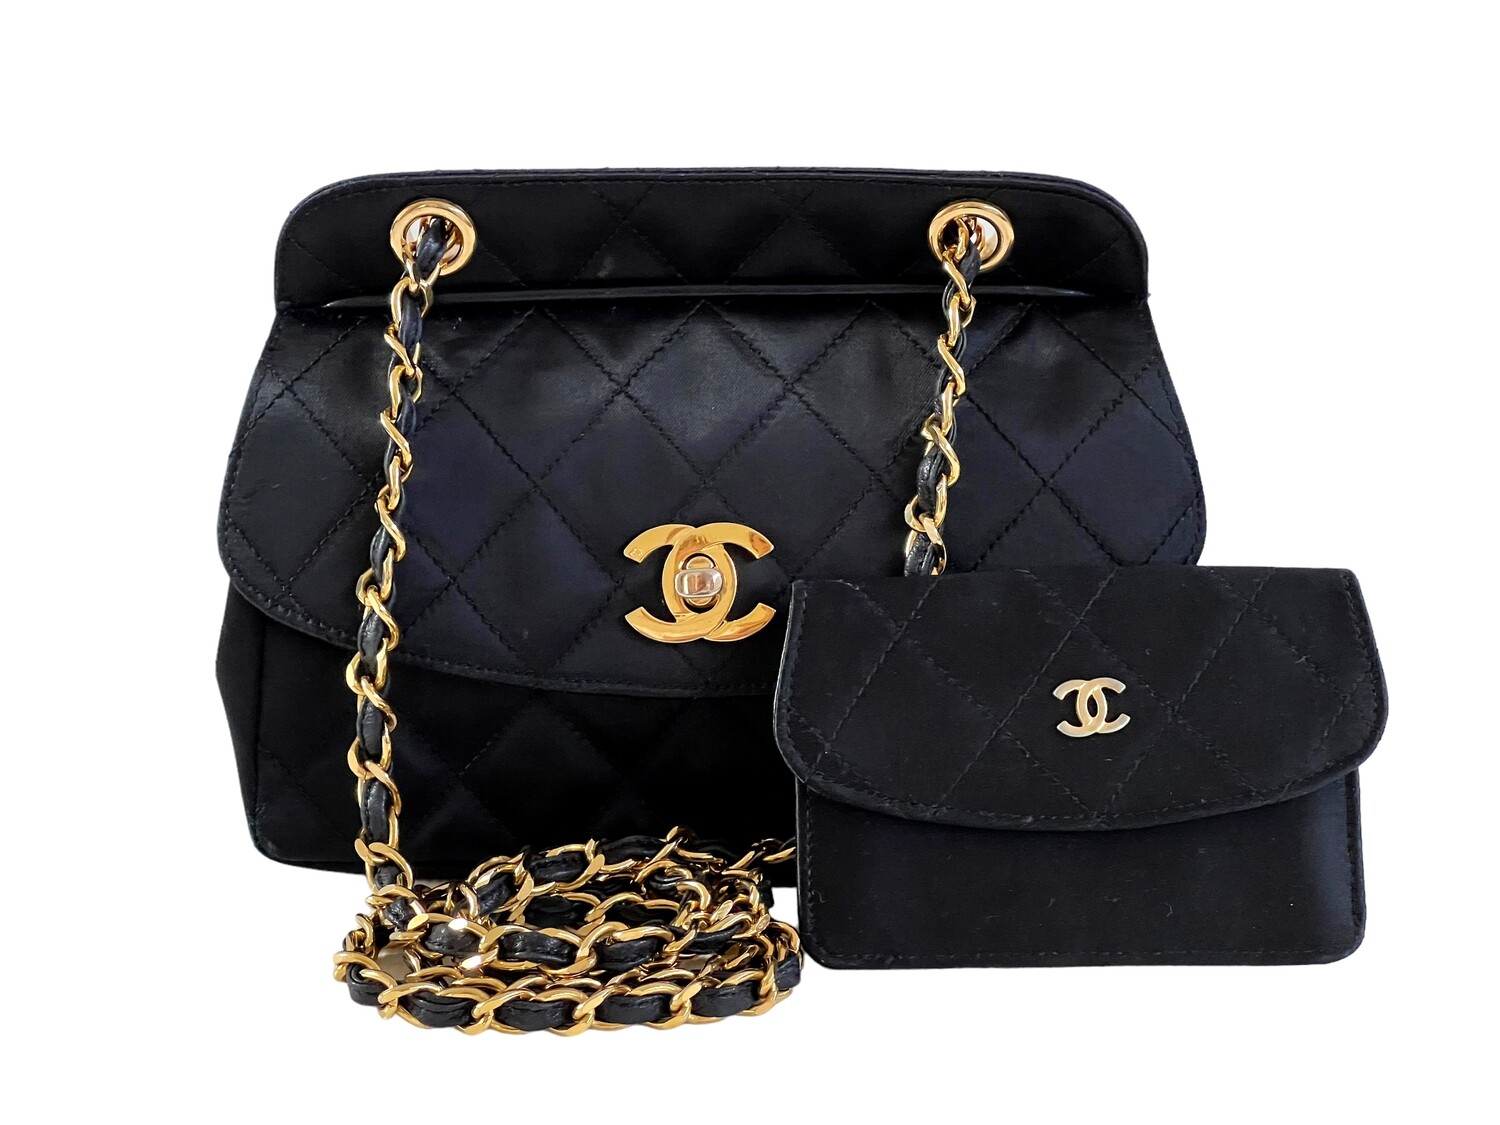 CHANEL CC TURNLOCK BLACK QUILTED SATIN FLAP EVENING SHOULDER